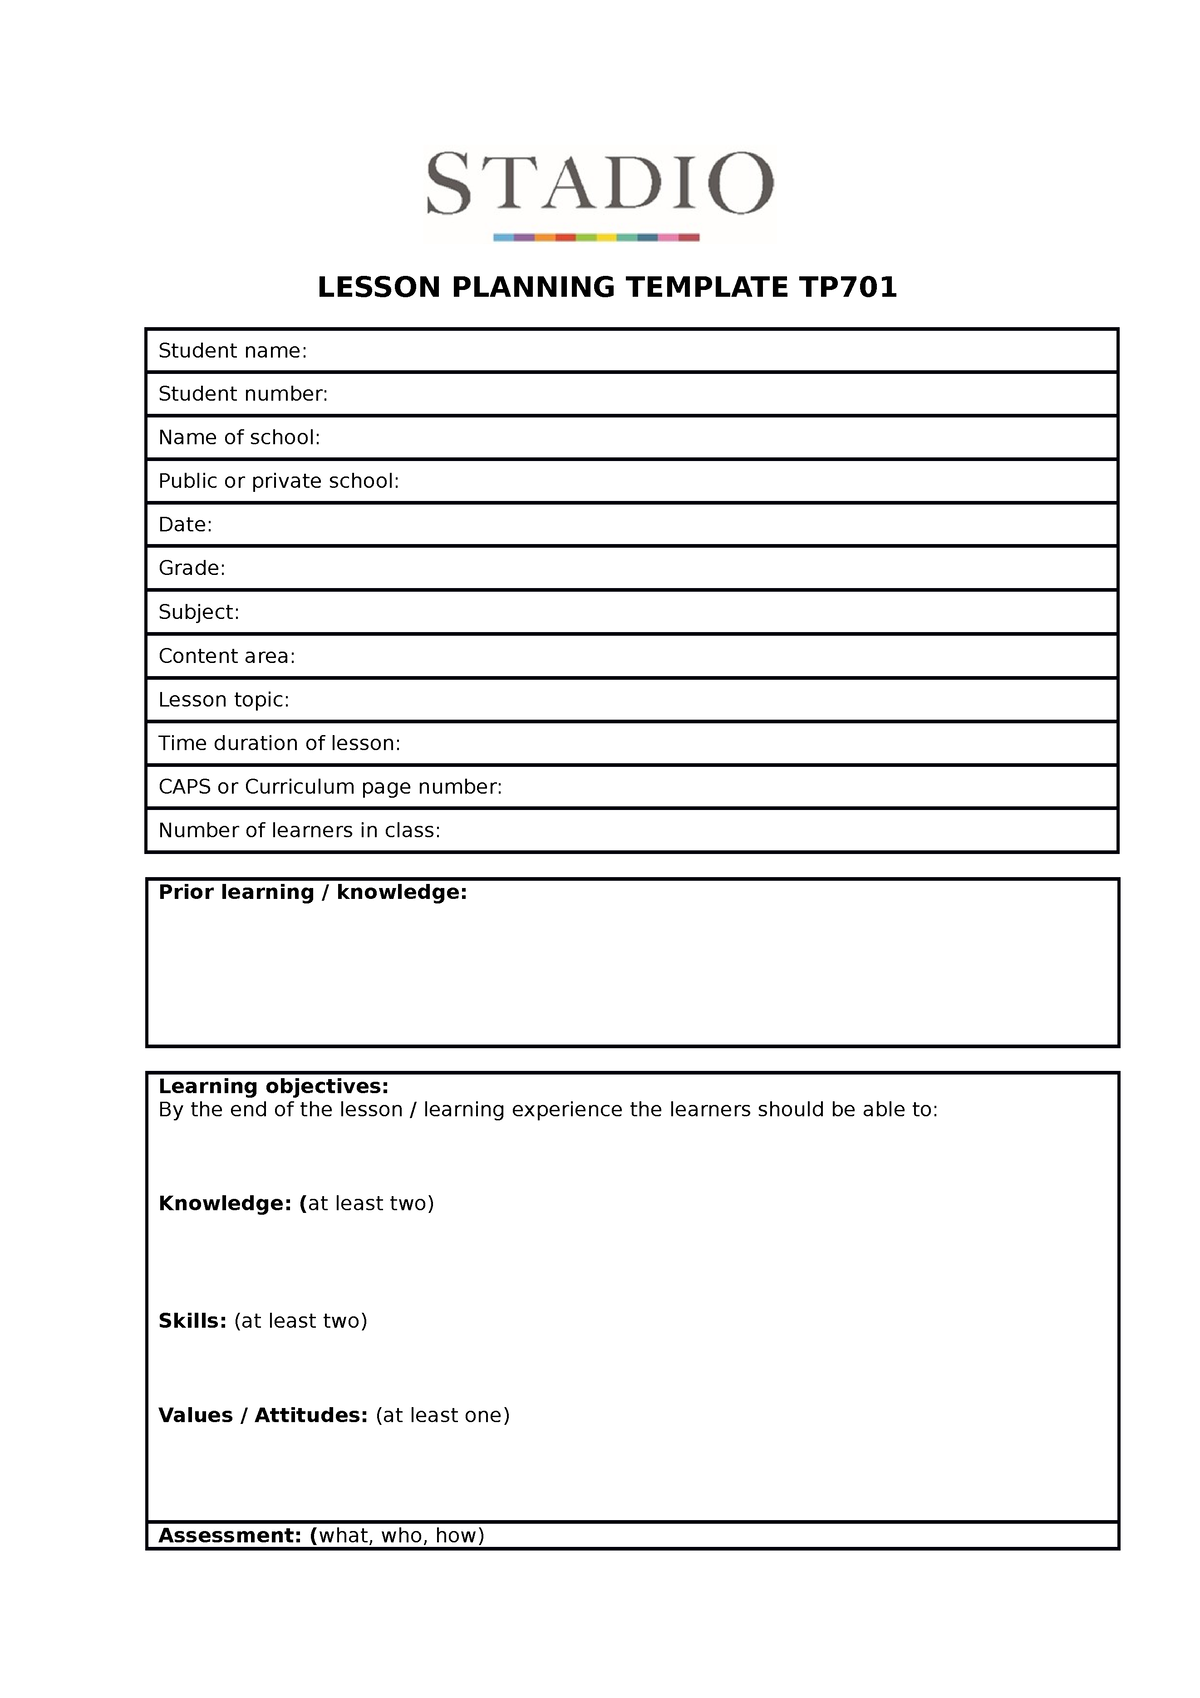 Generic Lesson Plan Template TP701 LESSON PLANNING TEMPLATE TP